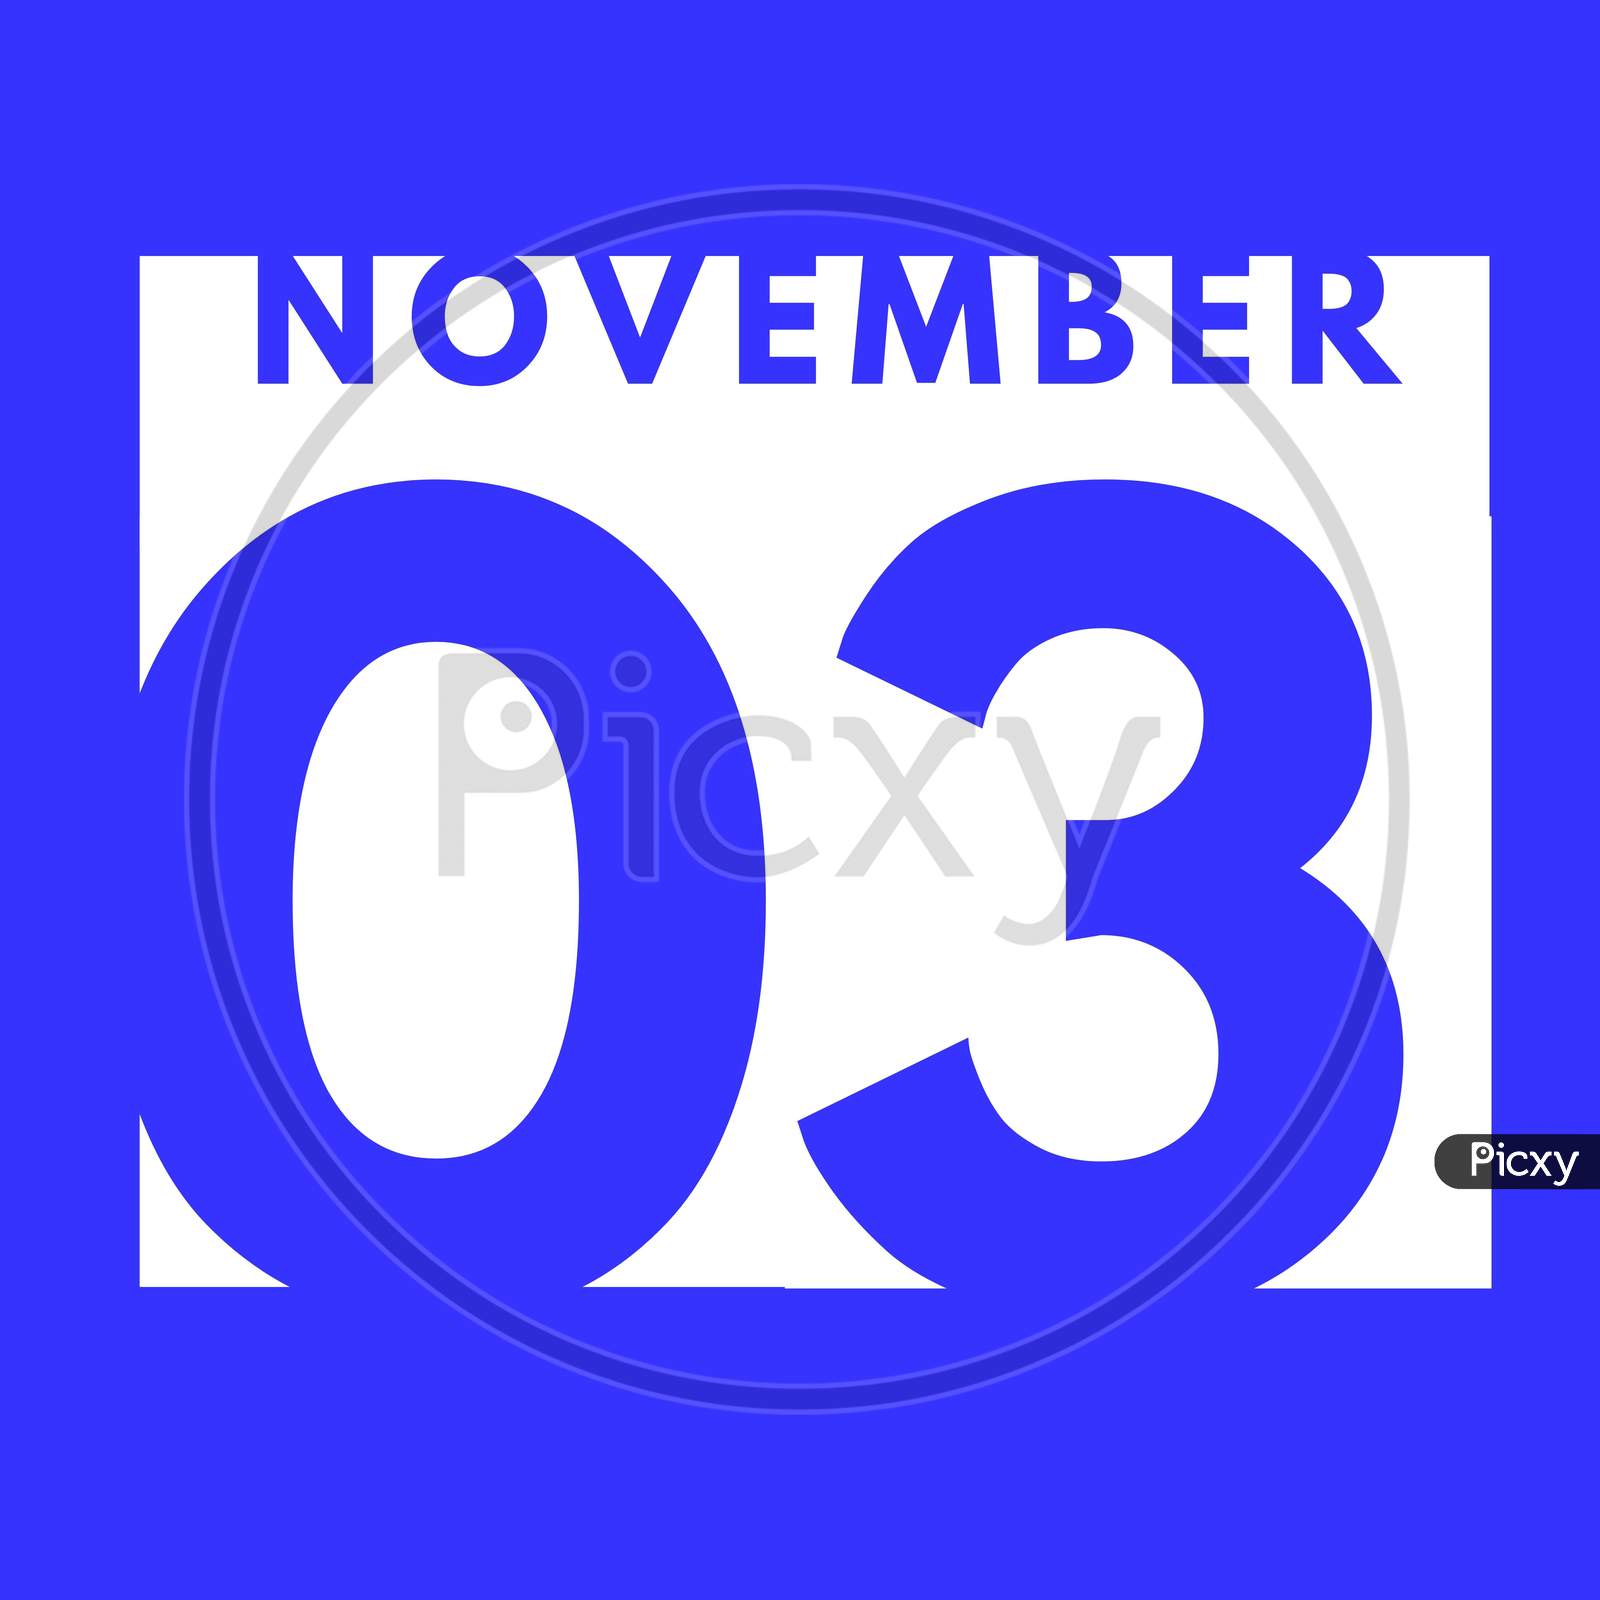 November 3 . Flat Modern Daily Calendar Icon .Date ,Day, Month .Calendar For The Month Of November